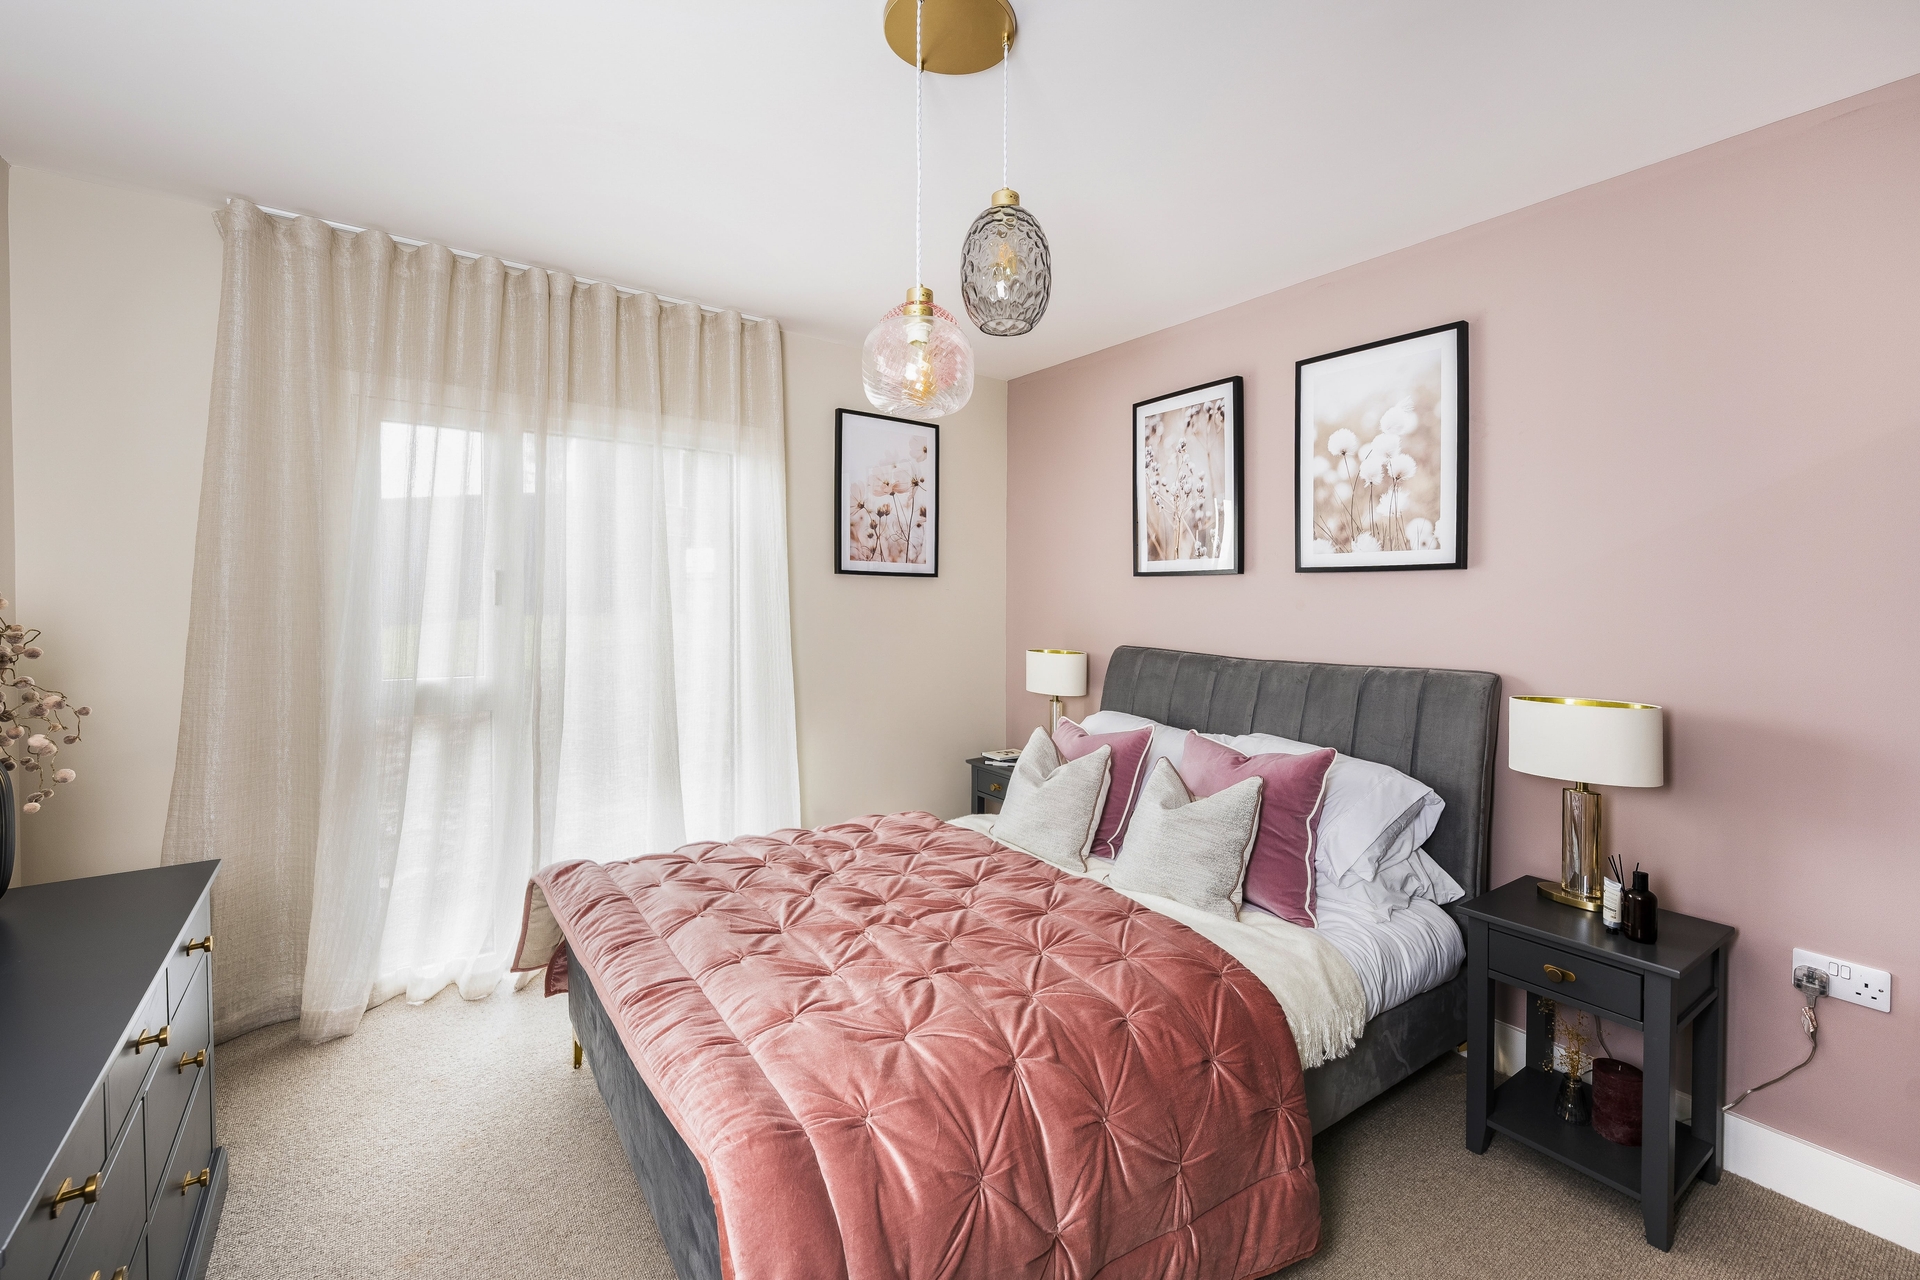 Bedroom - Pink, White Cream, bed. Contemporary Show Apartment now open at St. Leonards Quarter, Exeter